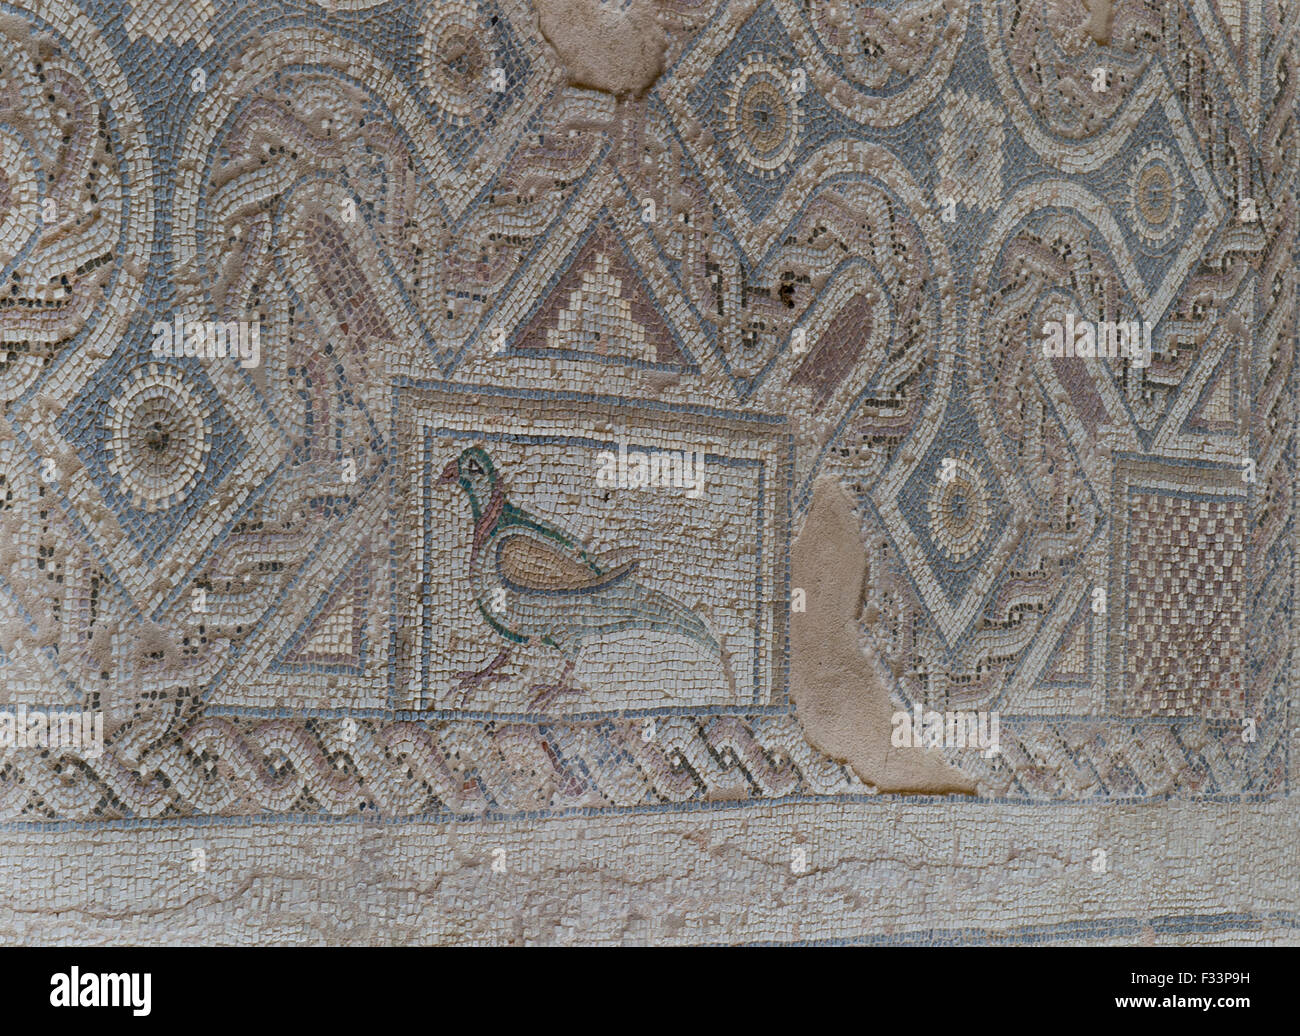 Early Christian mosaic depicting a bird possibly Ring-necked Parakeet ‘ The mosaics at Eustolios complex in Kourion, Cyprus date Stock Photo